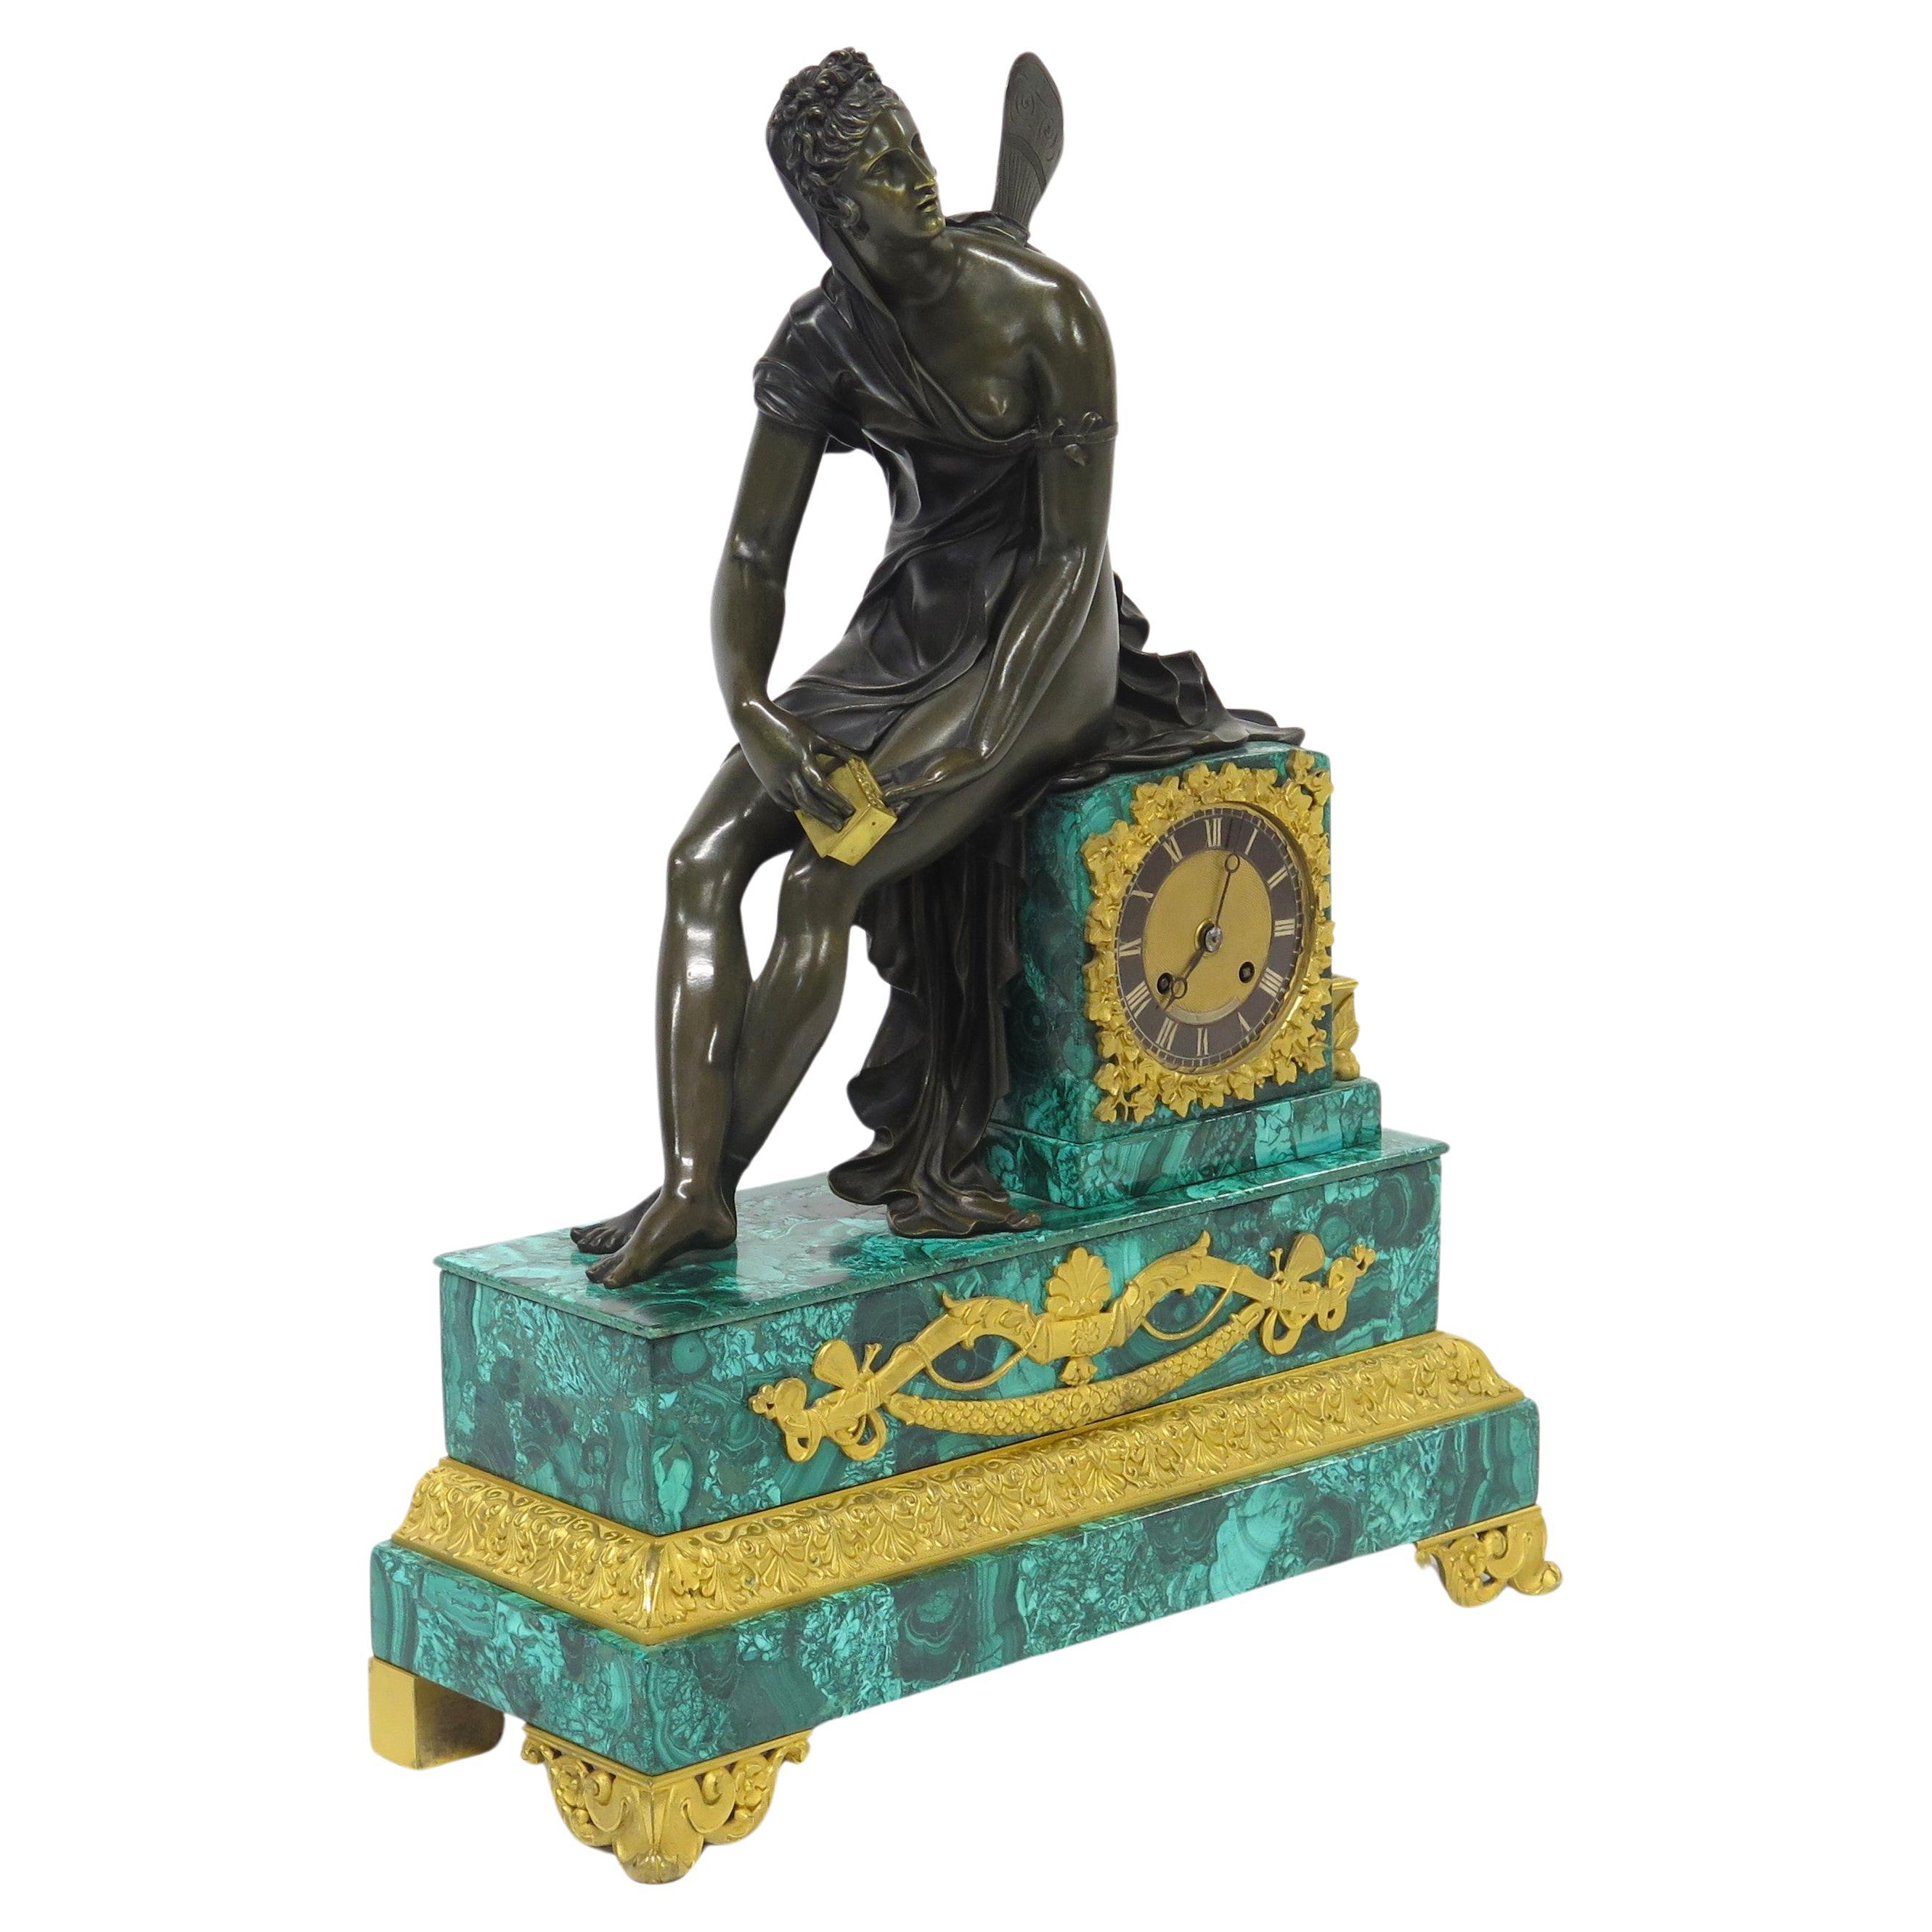 Charles X Malachite and Ormolu Mantel Clock depicting Psyche and the Golden Box For Sale